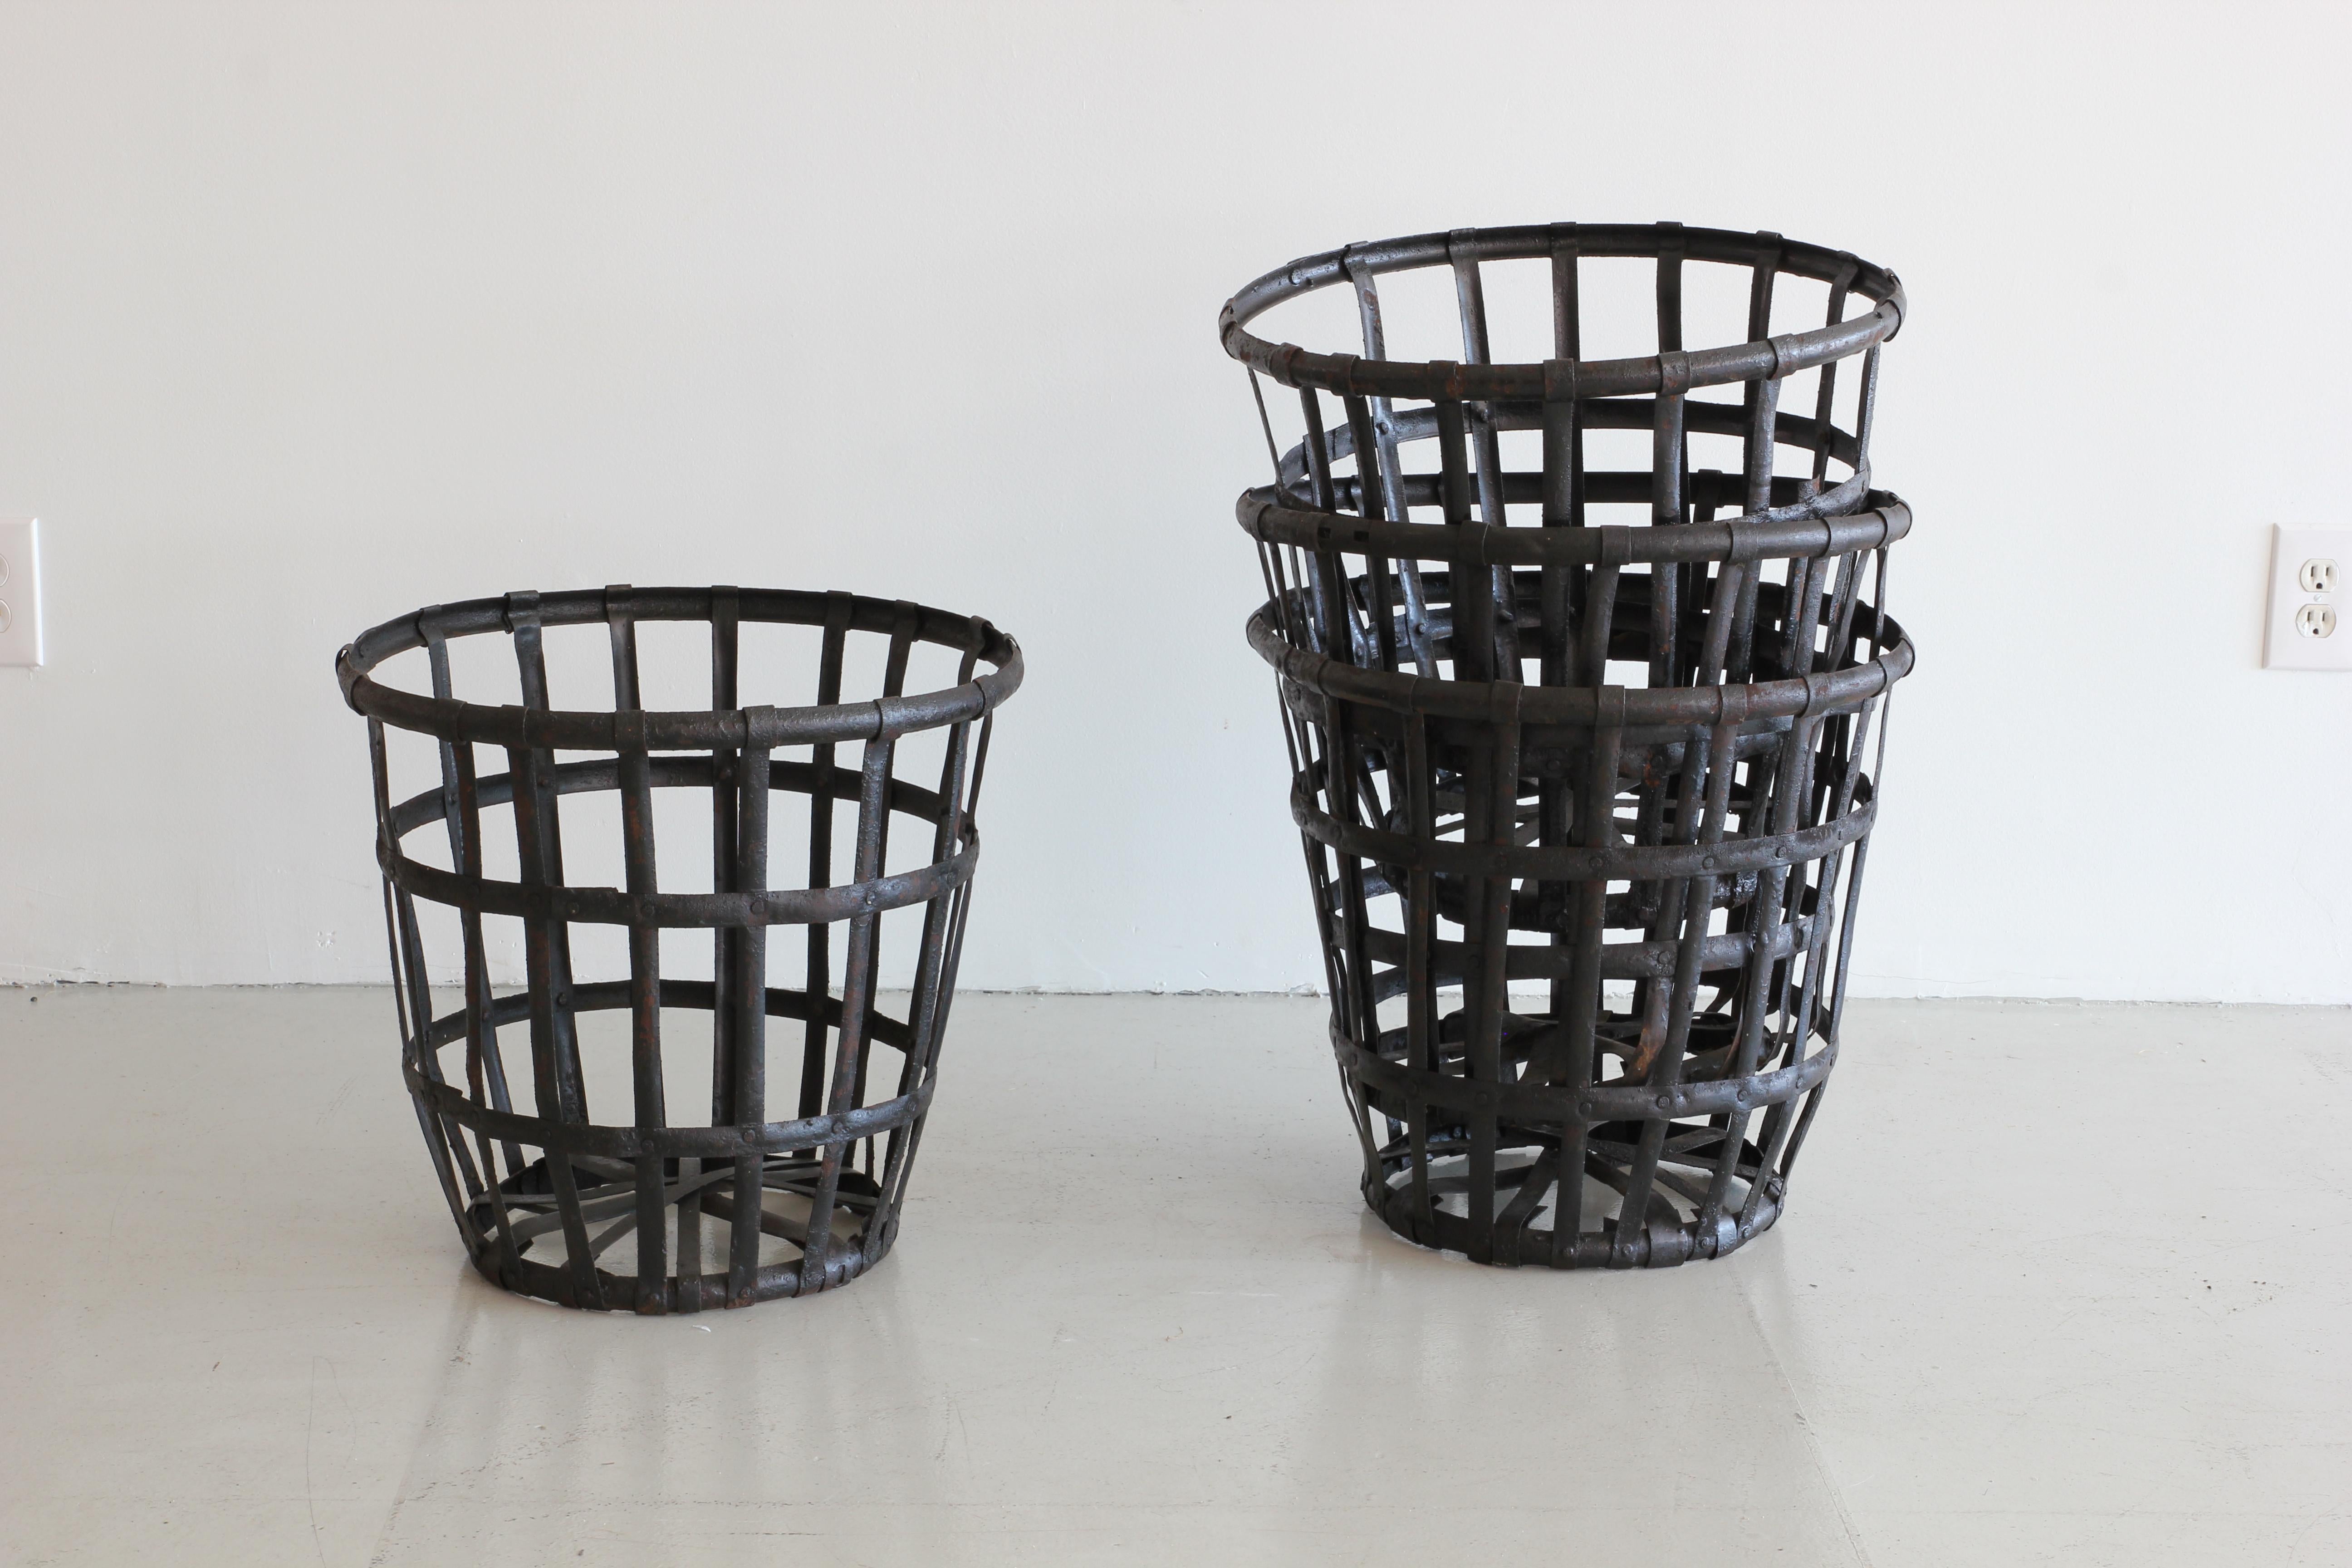 Excellent cage style baskets in black iron with heavy patina. Sold individually. Five available.